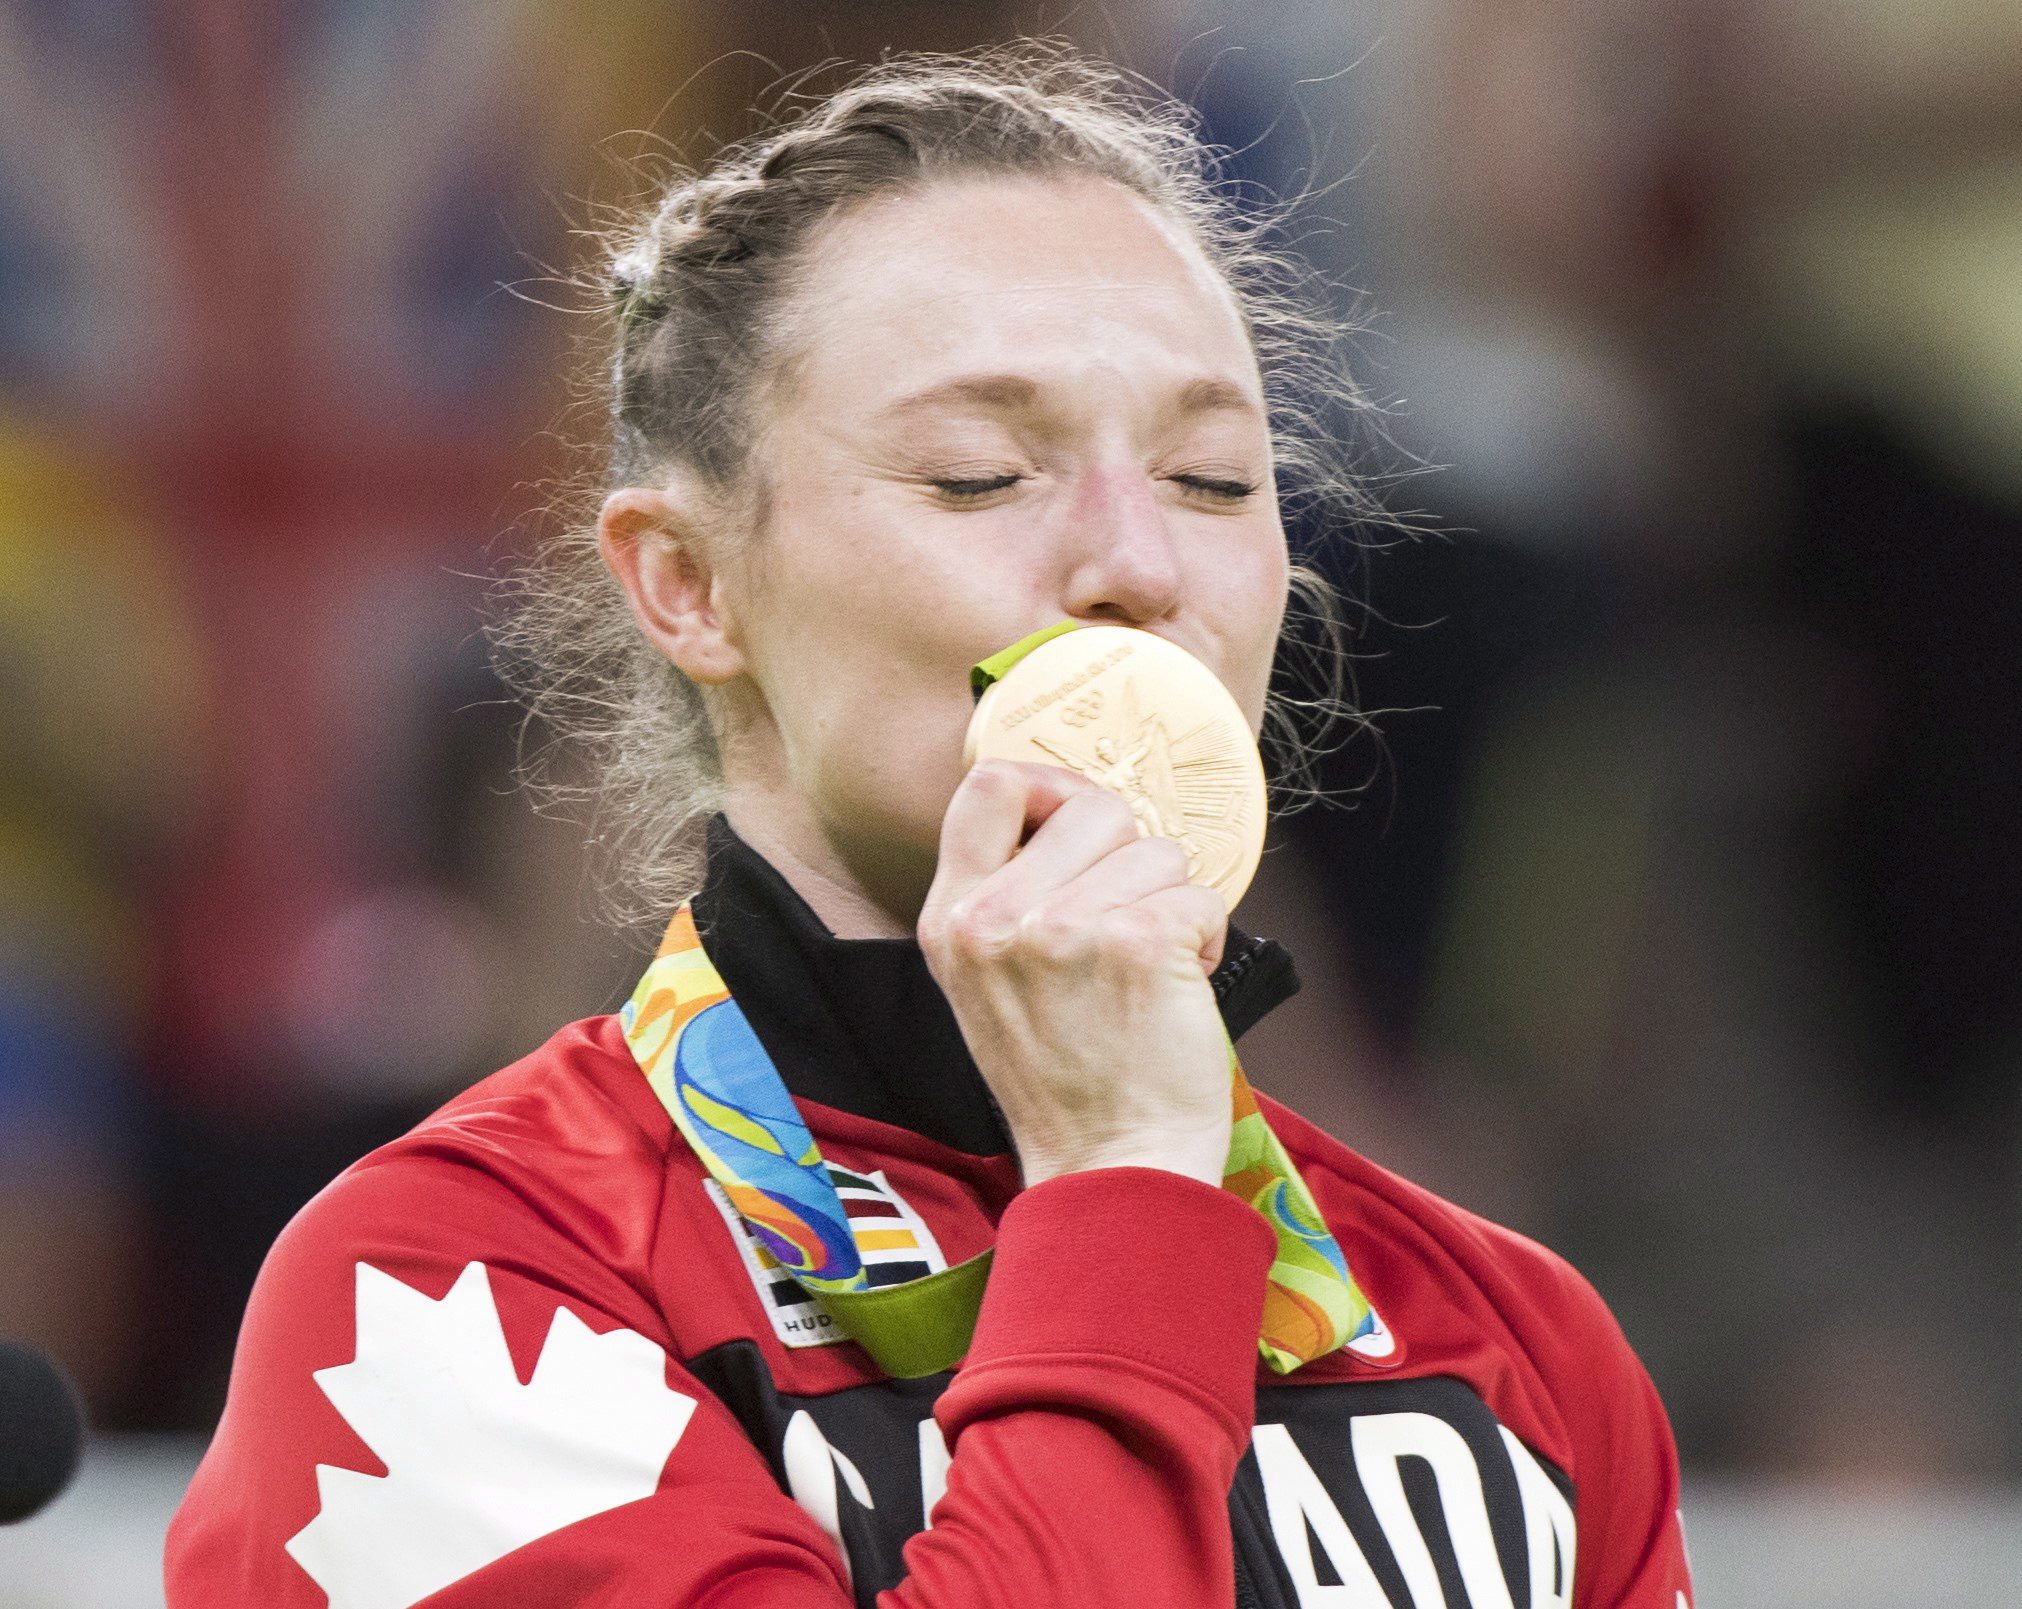 Canada's Rosie MacLennan, from King City, Ont., kisses her gold medal after winning the trampoline gymnastics competition at the 2016 Summer Olympics Friday, August 12, 2016 in Rio de Janeiro, Brazil.THE CANADIAN PRESS/Ryan Remiorz